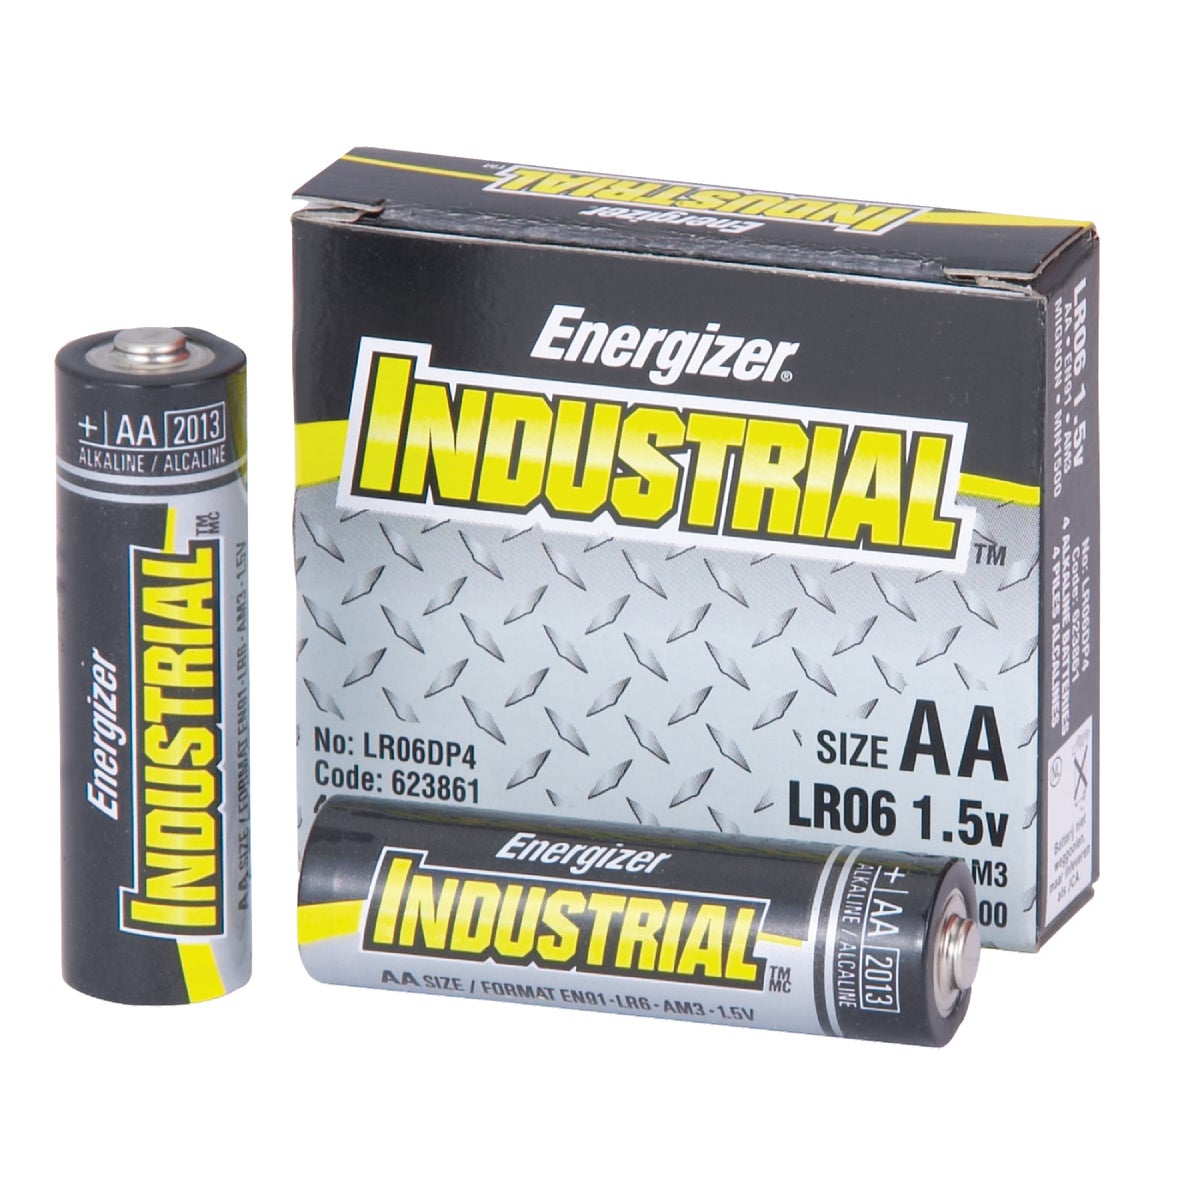 Item 825131, Industrial strength batteries featuring zinc-manganese dioxide chemistry.